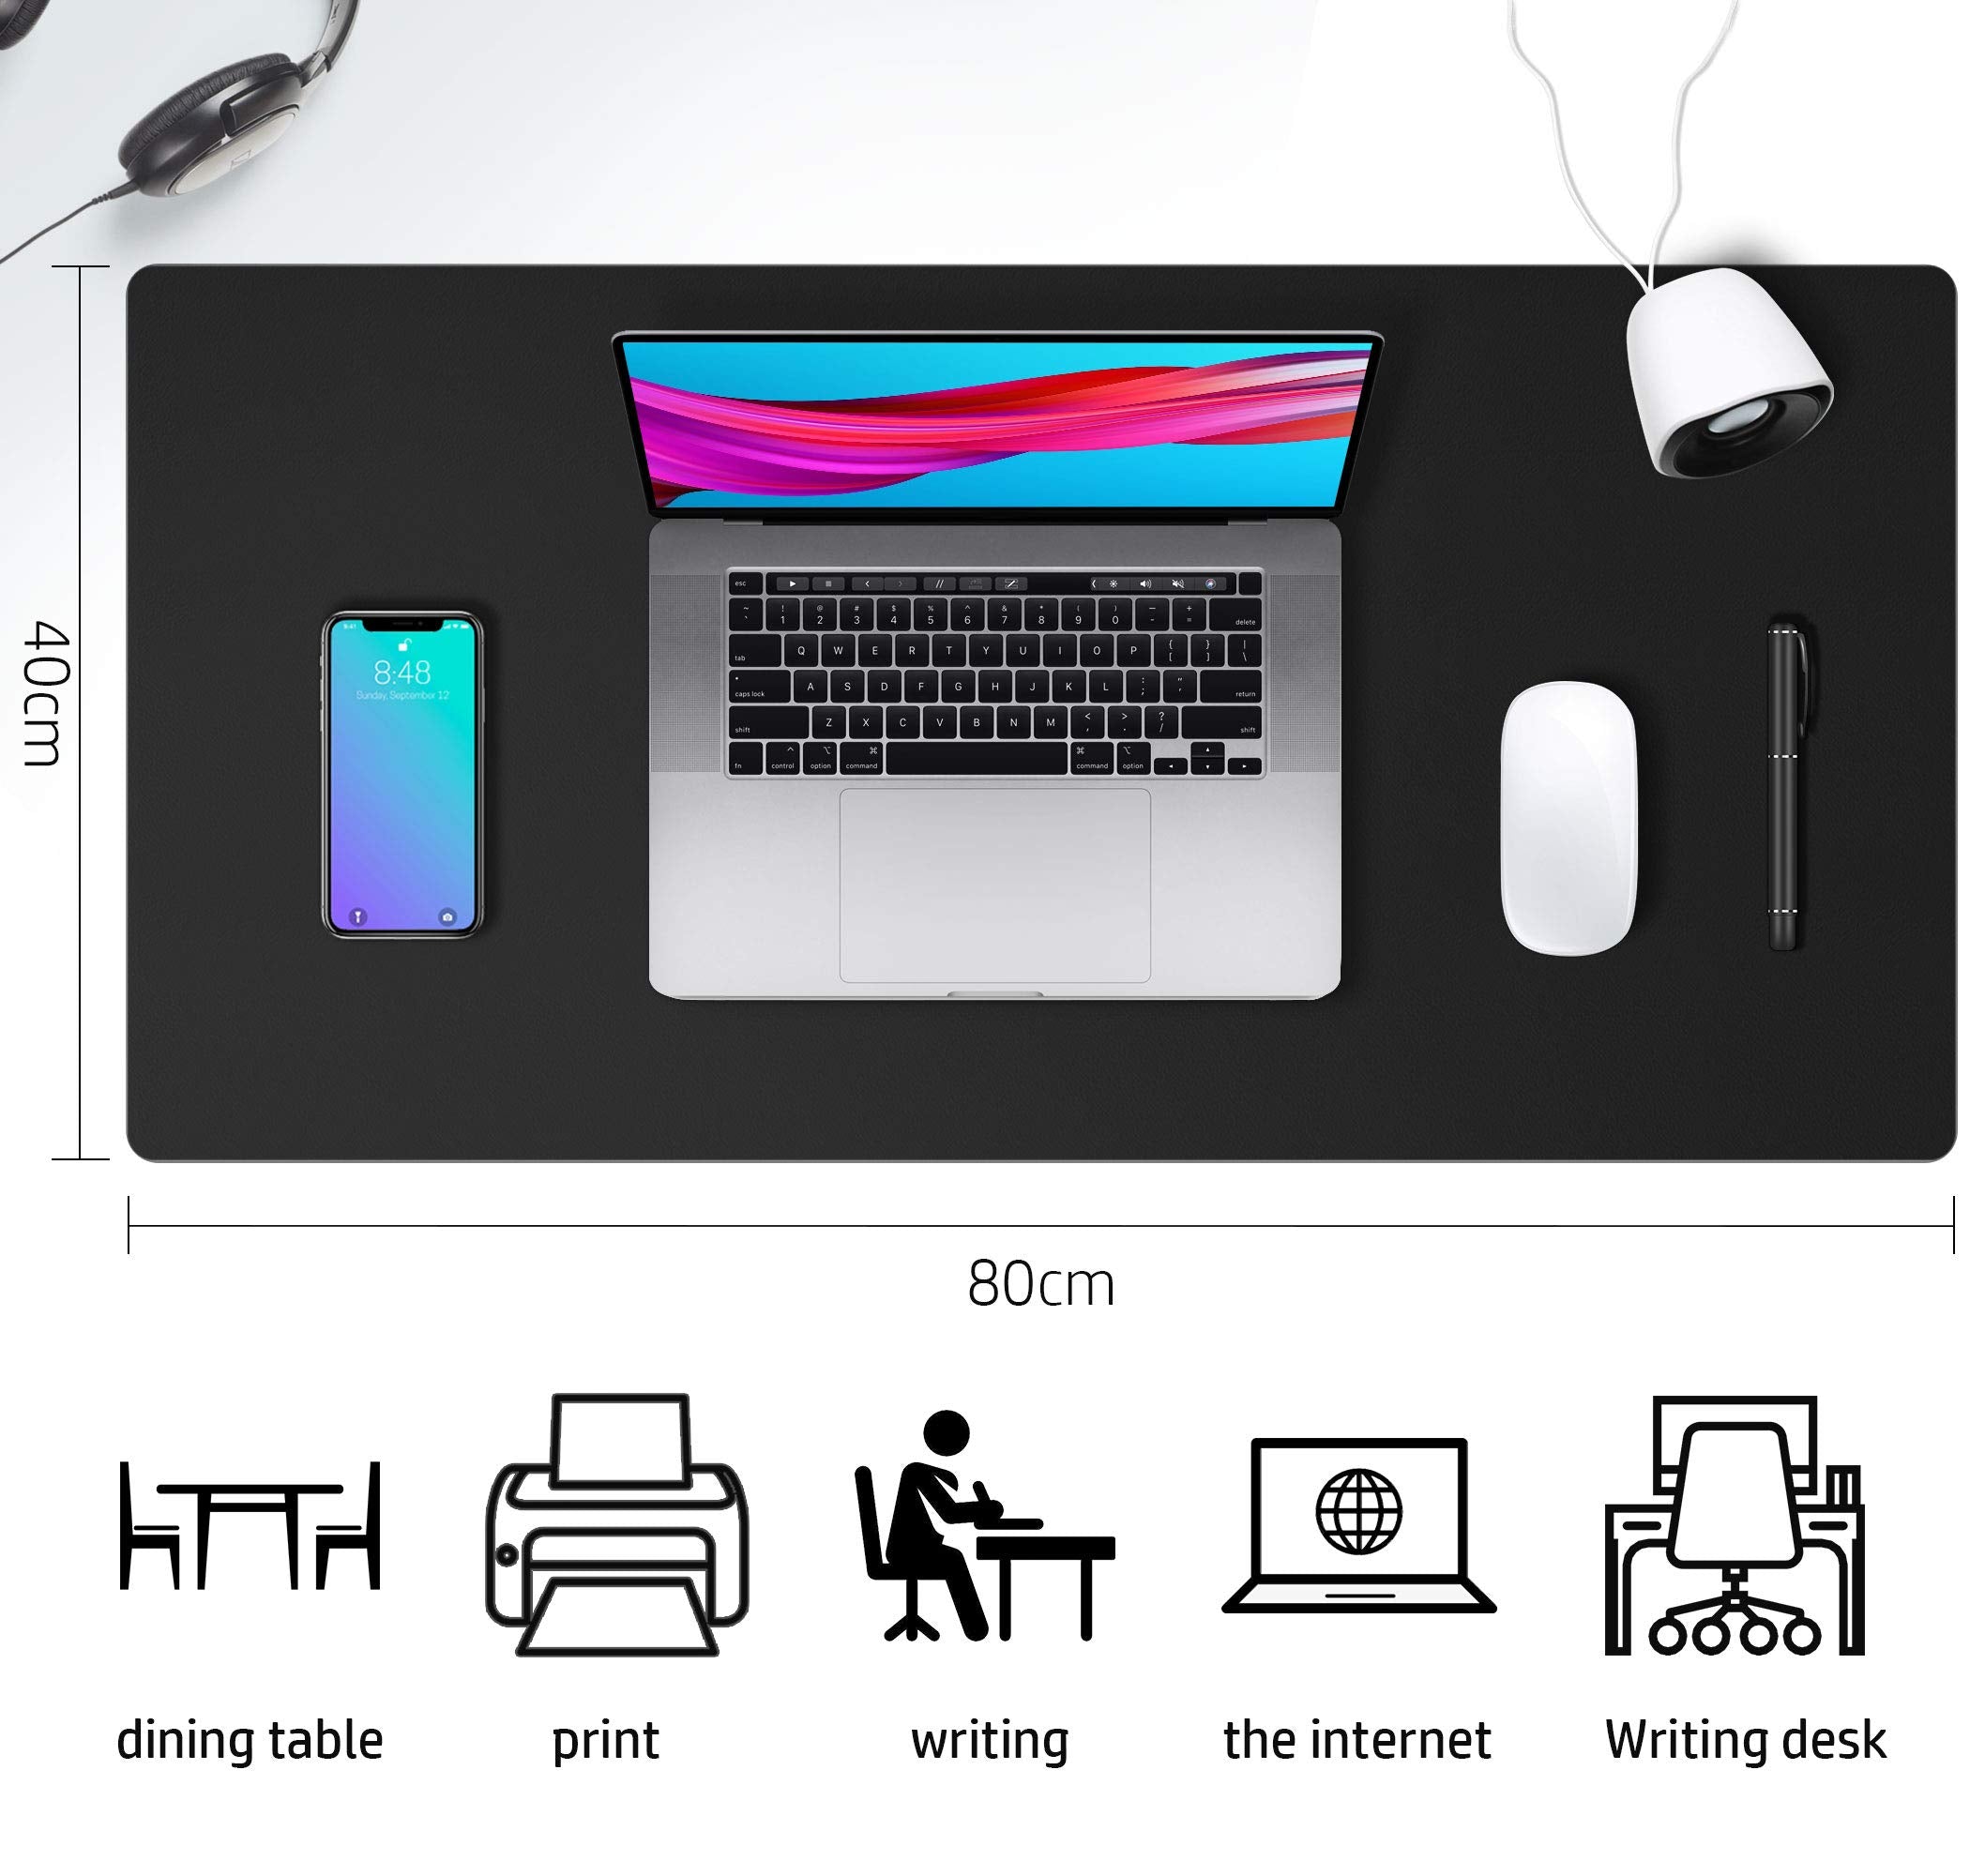 Leather Desk Pad Protector,Mouse Pad,Office Desk Mat,Non-Slip PU Leather Desk Blotter,Laptop Desk Pad,Waterproof Desk Writing Pad for Office and Home (80cm x 40cm, Black)